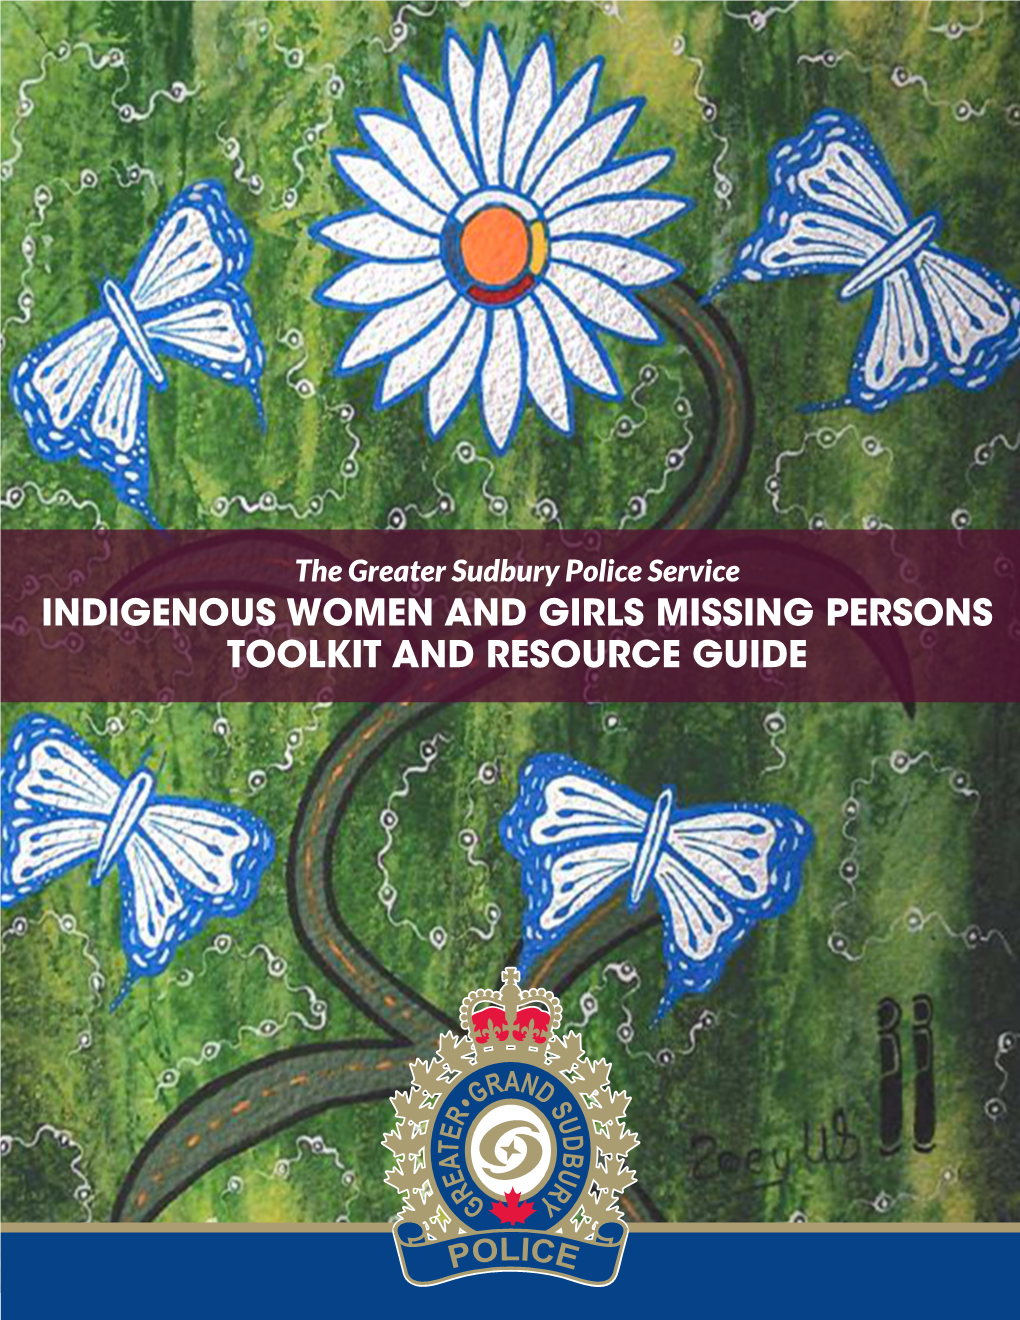 INDIGENOUS WOMEN and GIRLS MISSING PERSONS TOOLKIT and RESOURCE GUIDE Cover Artwork and Poem Brought to You by Zoey Wood-Solomon